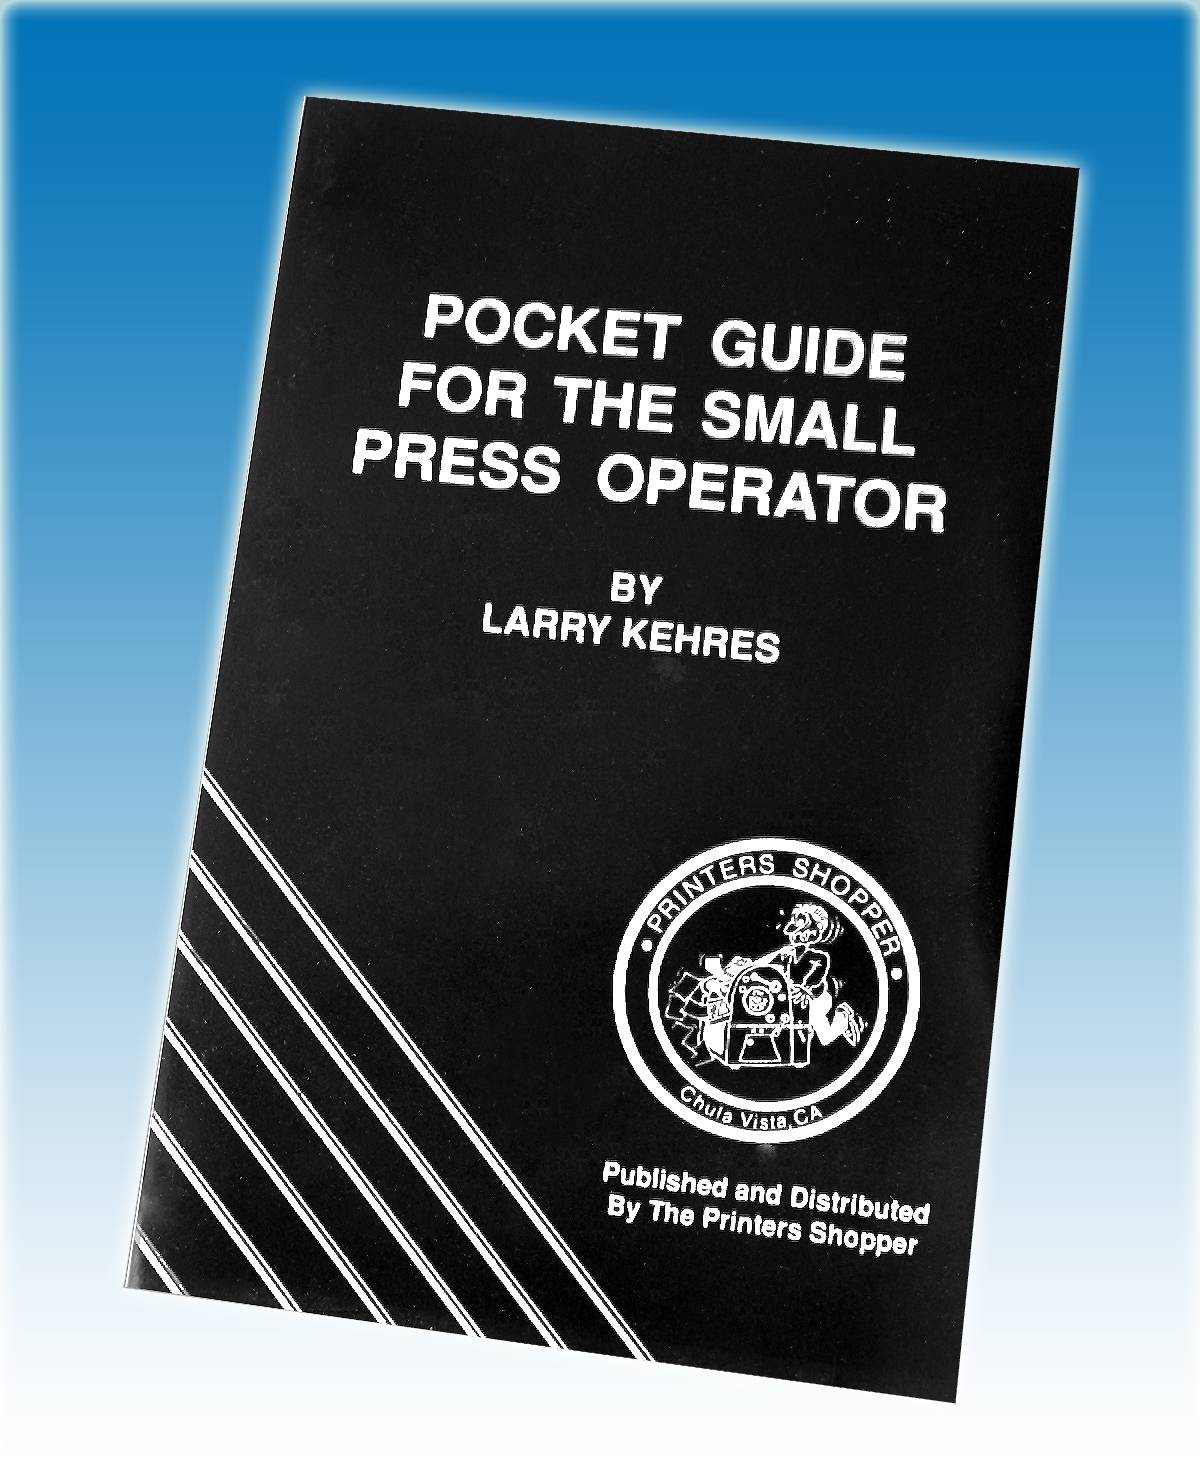 PRESS OPERATOR POCKET GUIDE By Larry Kehres